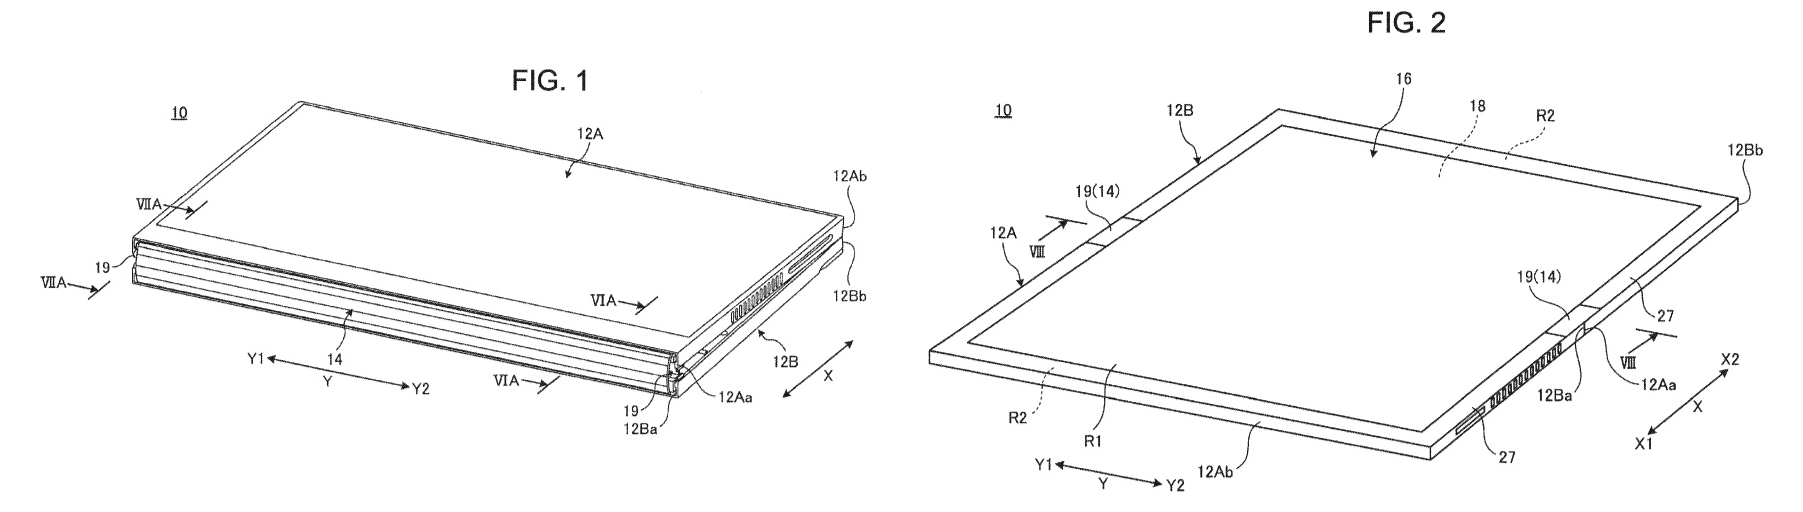 Lenovo to join the foldable tablet fray according to new patent - onmsft. Com - january 22, 2019